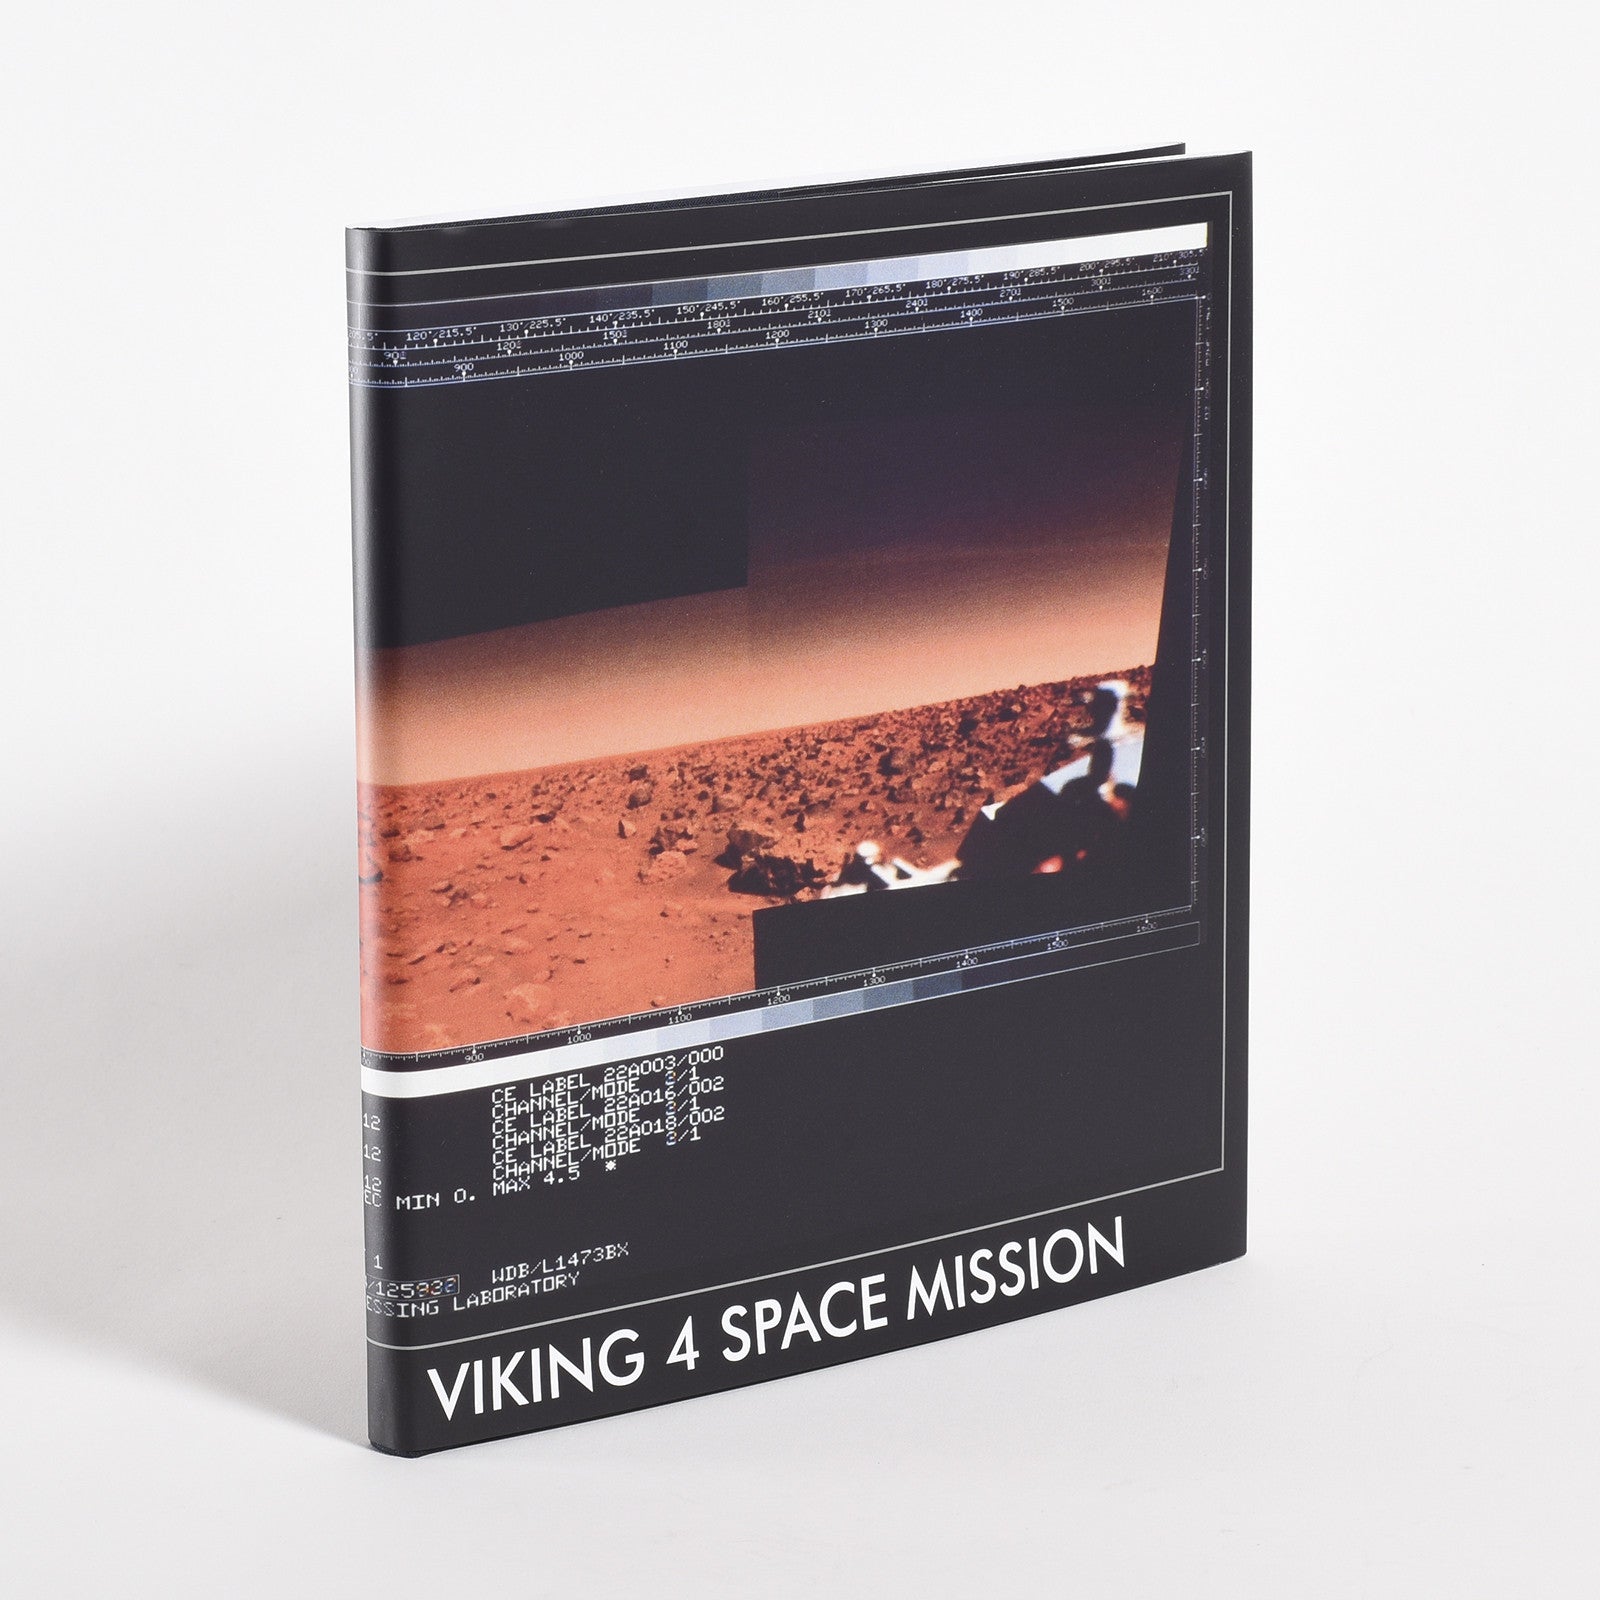 Peter Mitchell - A New Refutation of the Viking 4 Space Mission